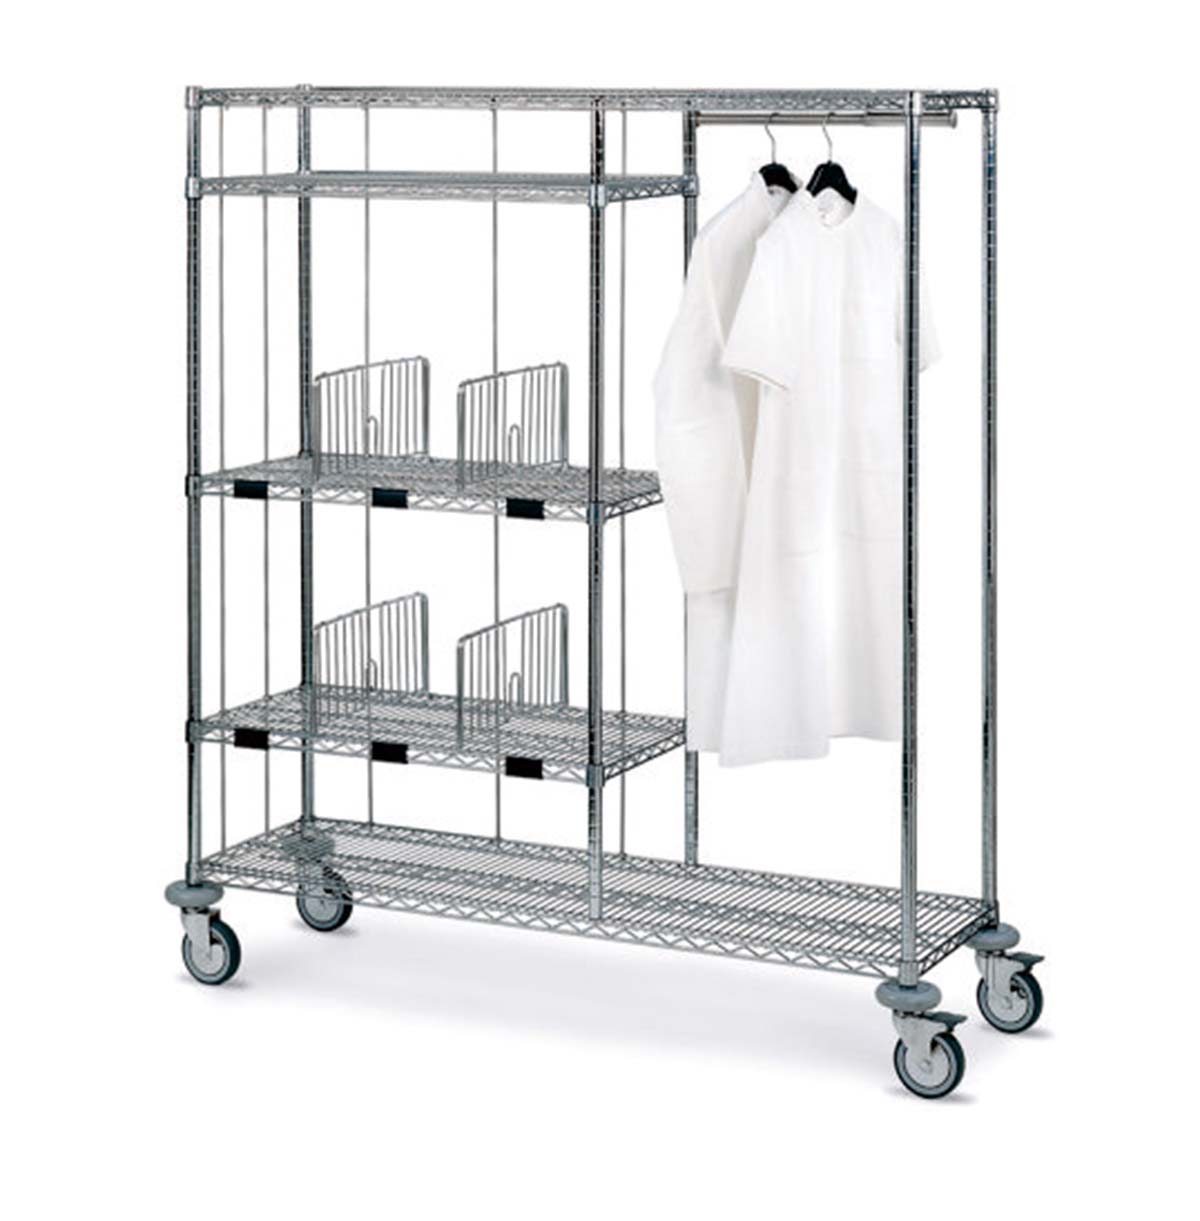 clothes rack price-Shenzhen Meizhigao Technology Company Limited.